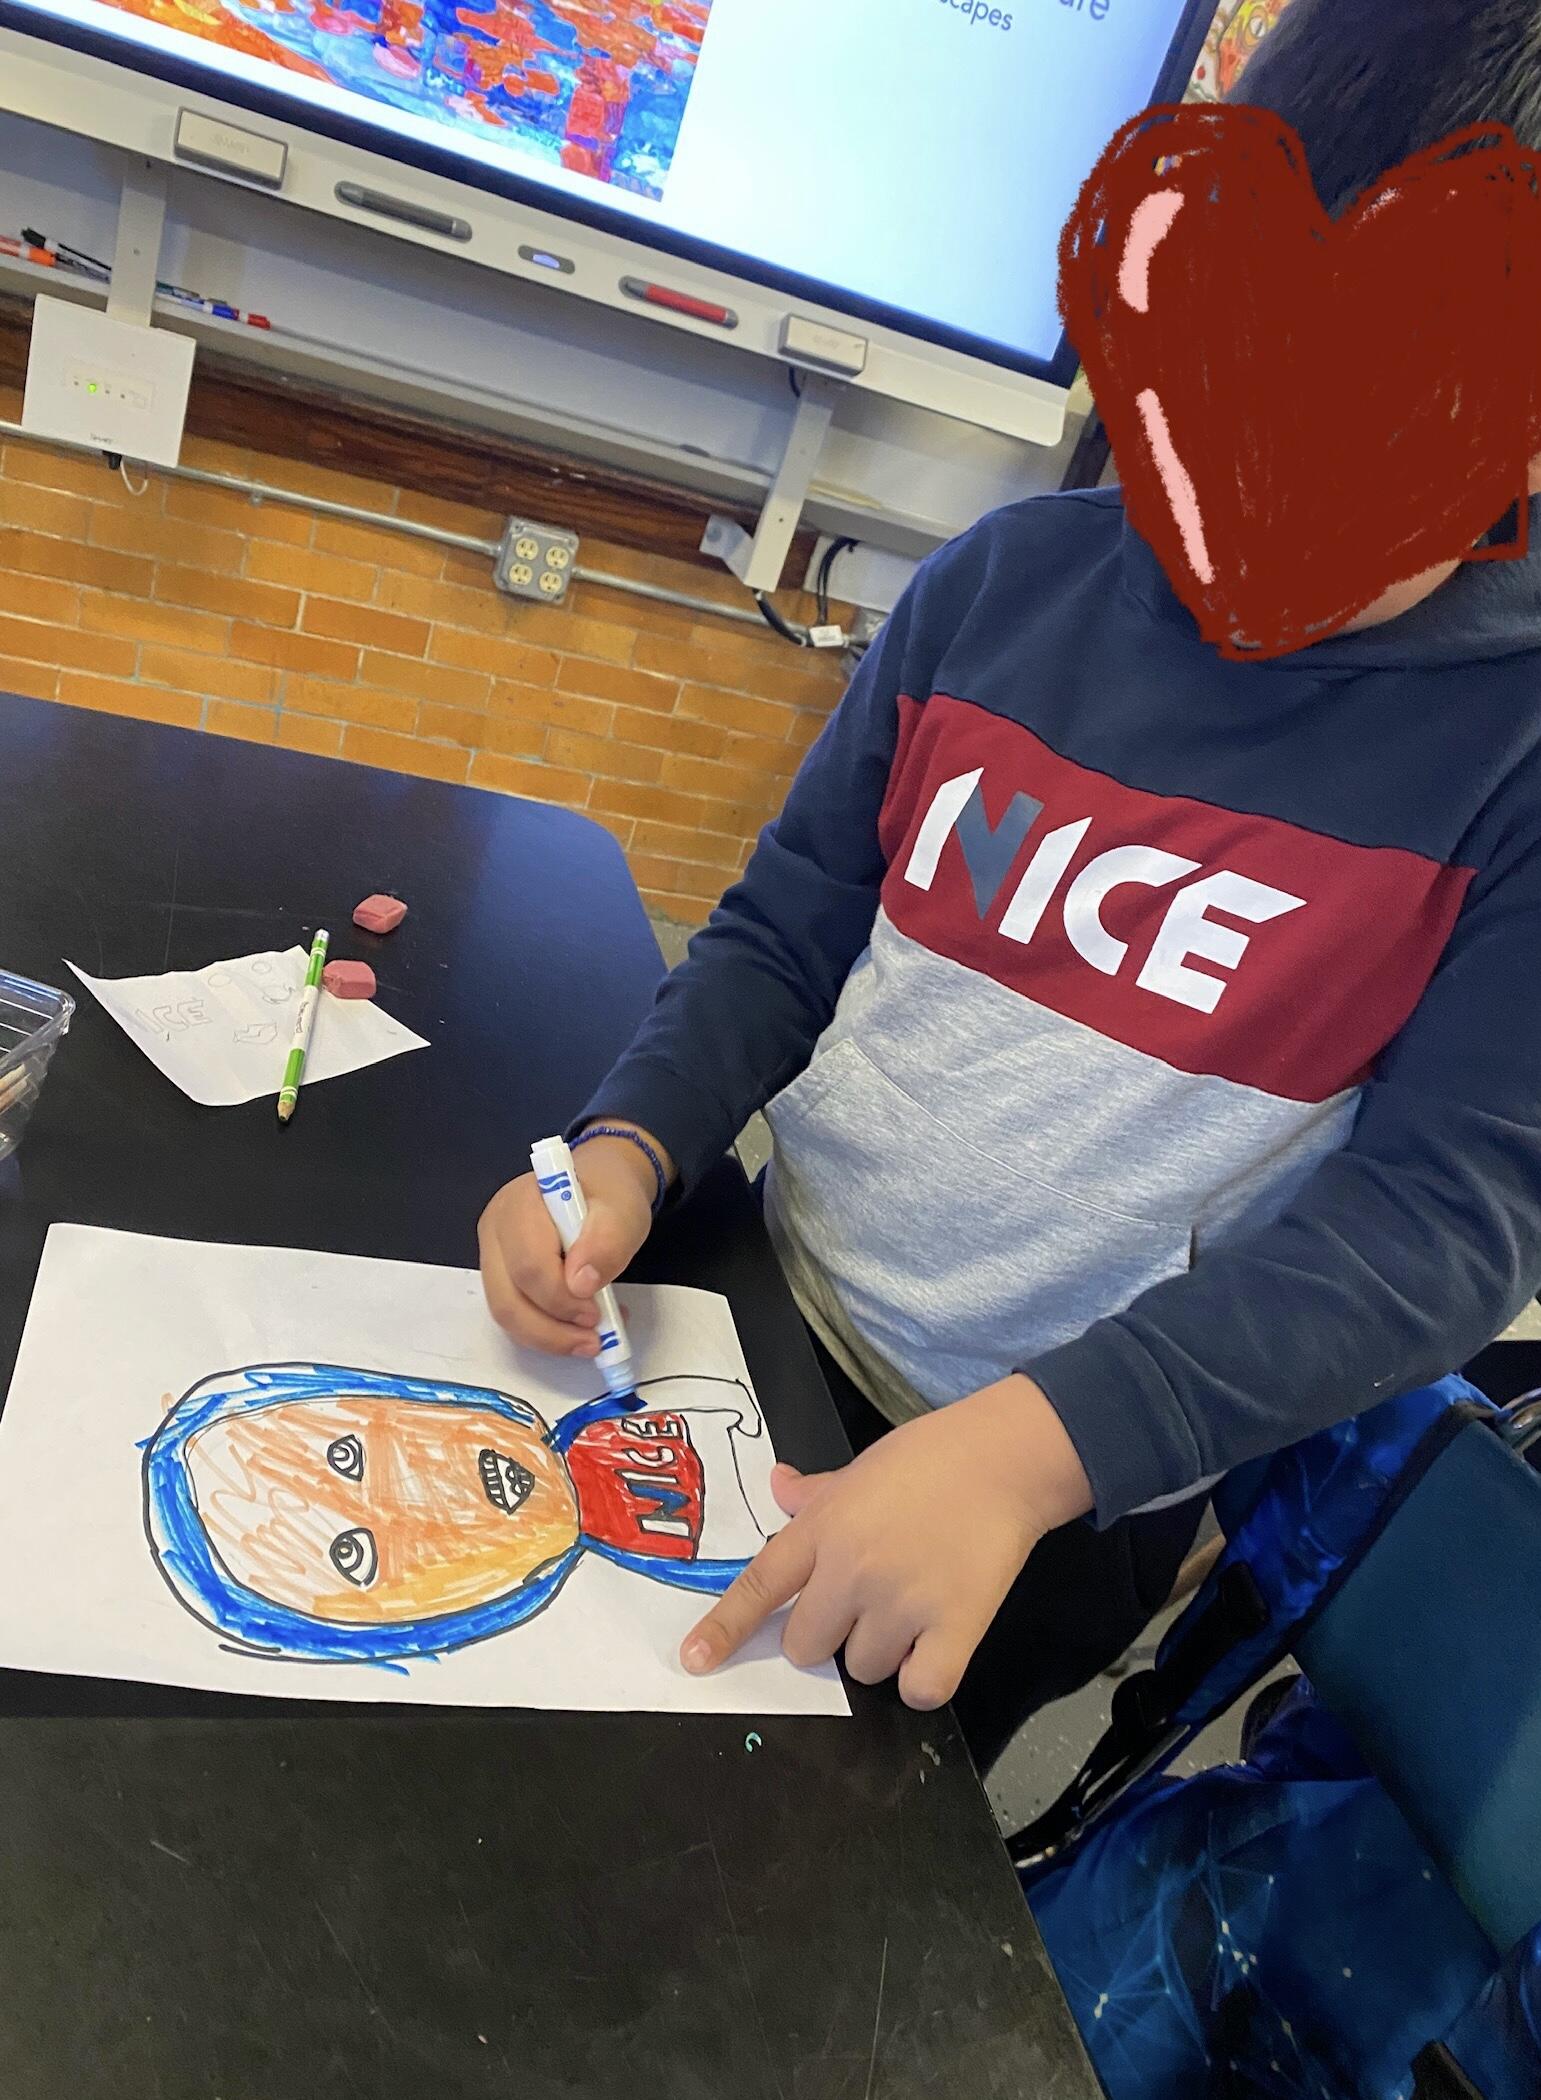 A student with a heart over their face to protect privacy is standing at a table and coloring with marker a portrait of themselves. The student is using blue, red, and a tan colored marker. 